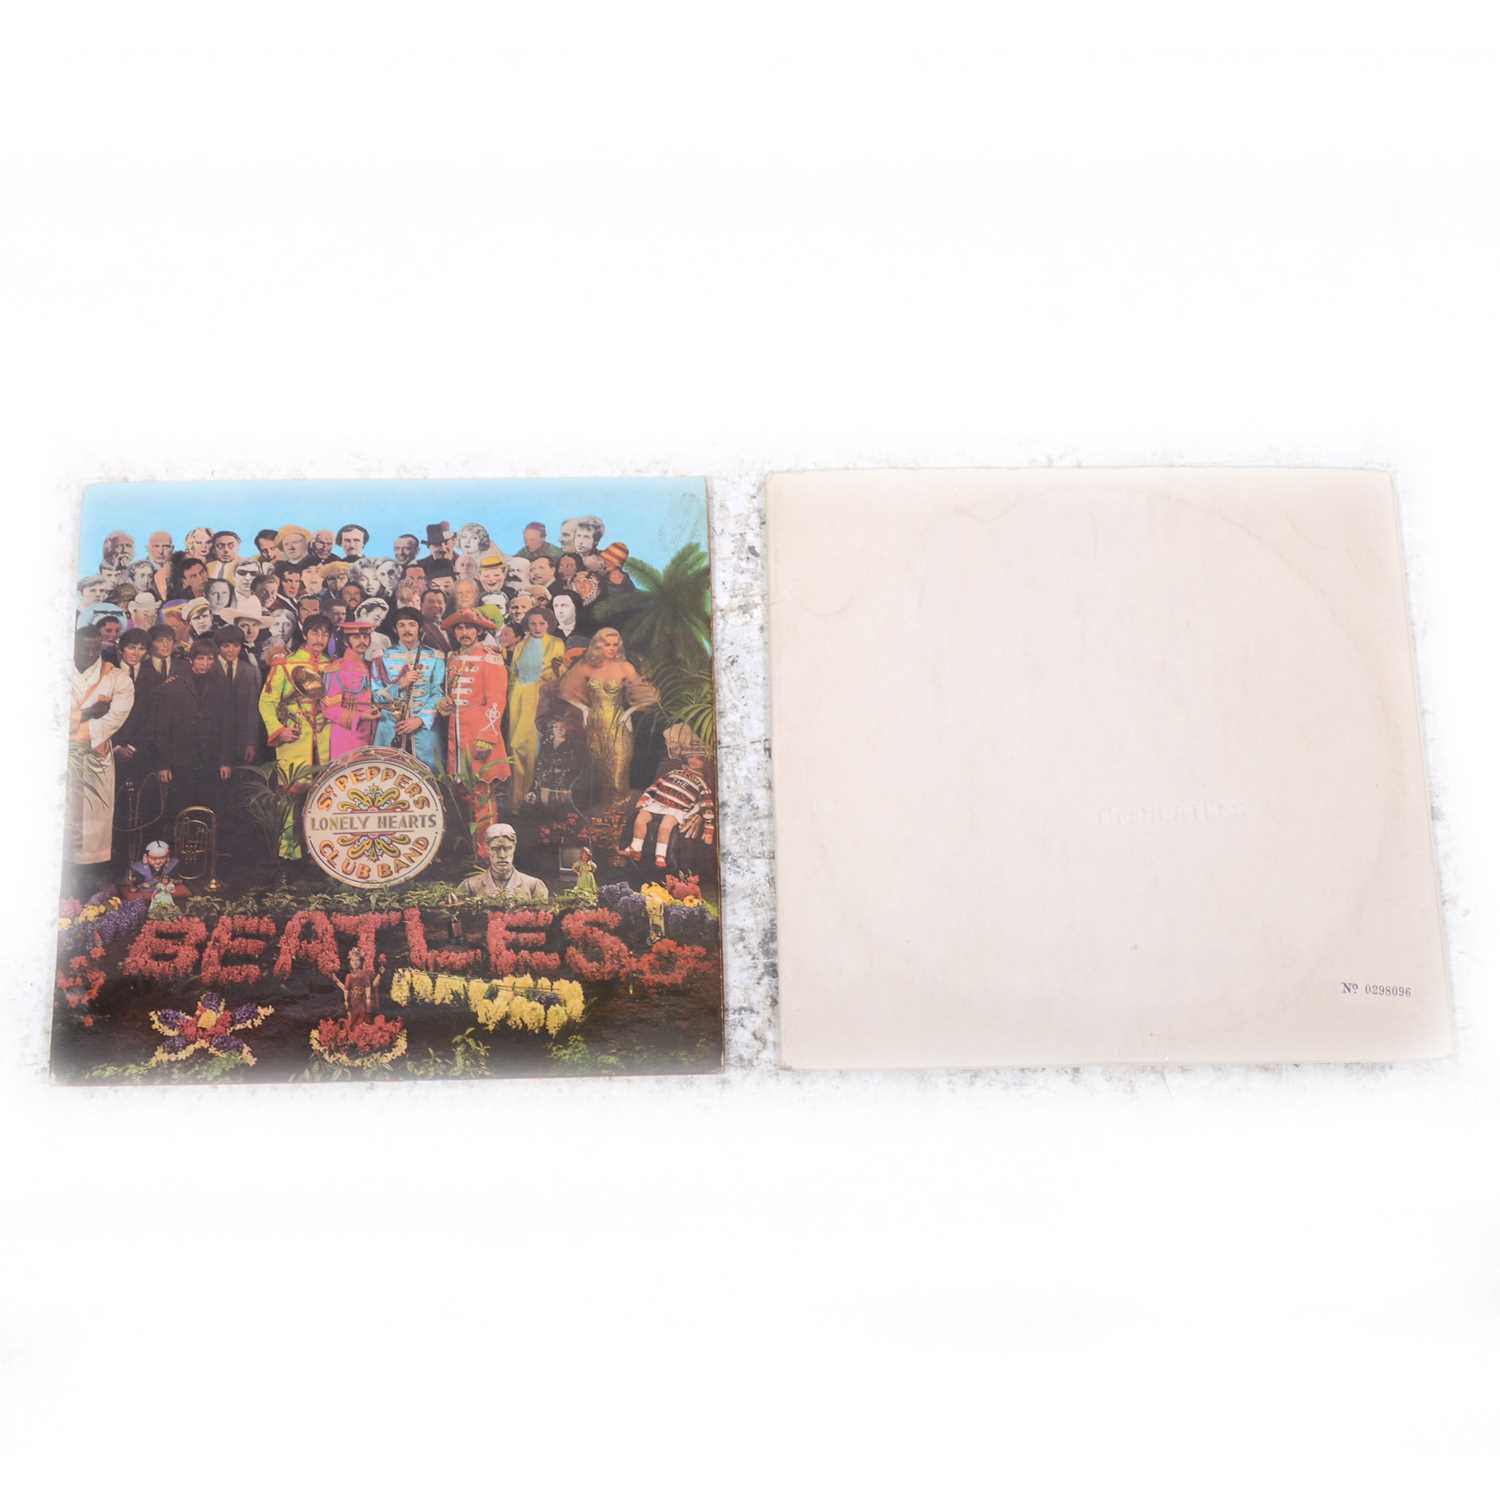 Lot 10 - The Beatles White Album and Sgt. Pepper's Loney Hearts Club Band vinyl LP records.